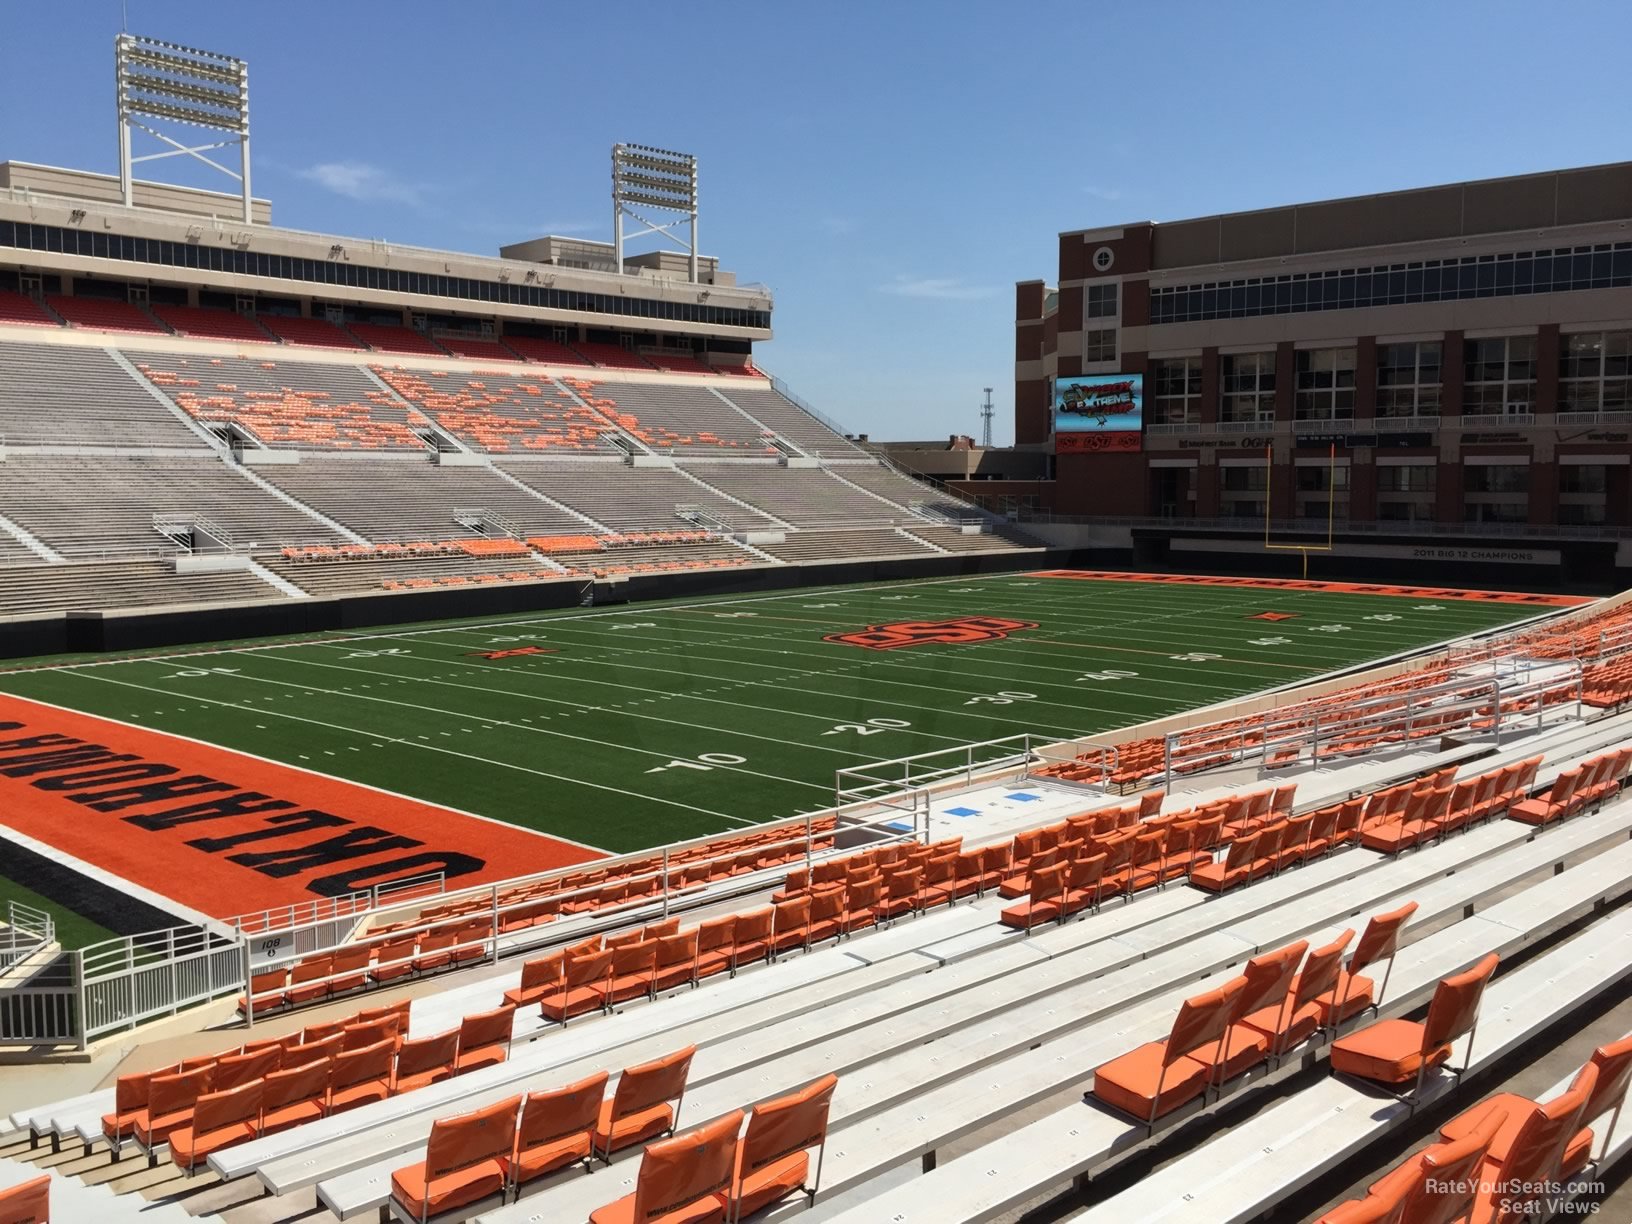 section 211, row 20 seat view  - boone pickens stadium